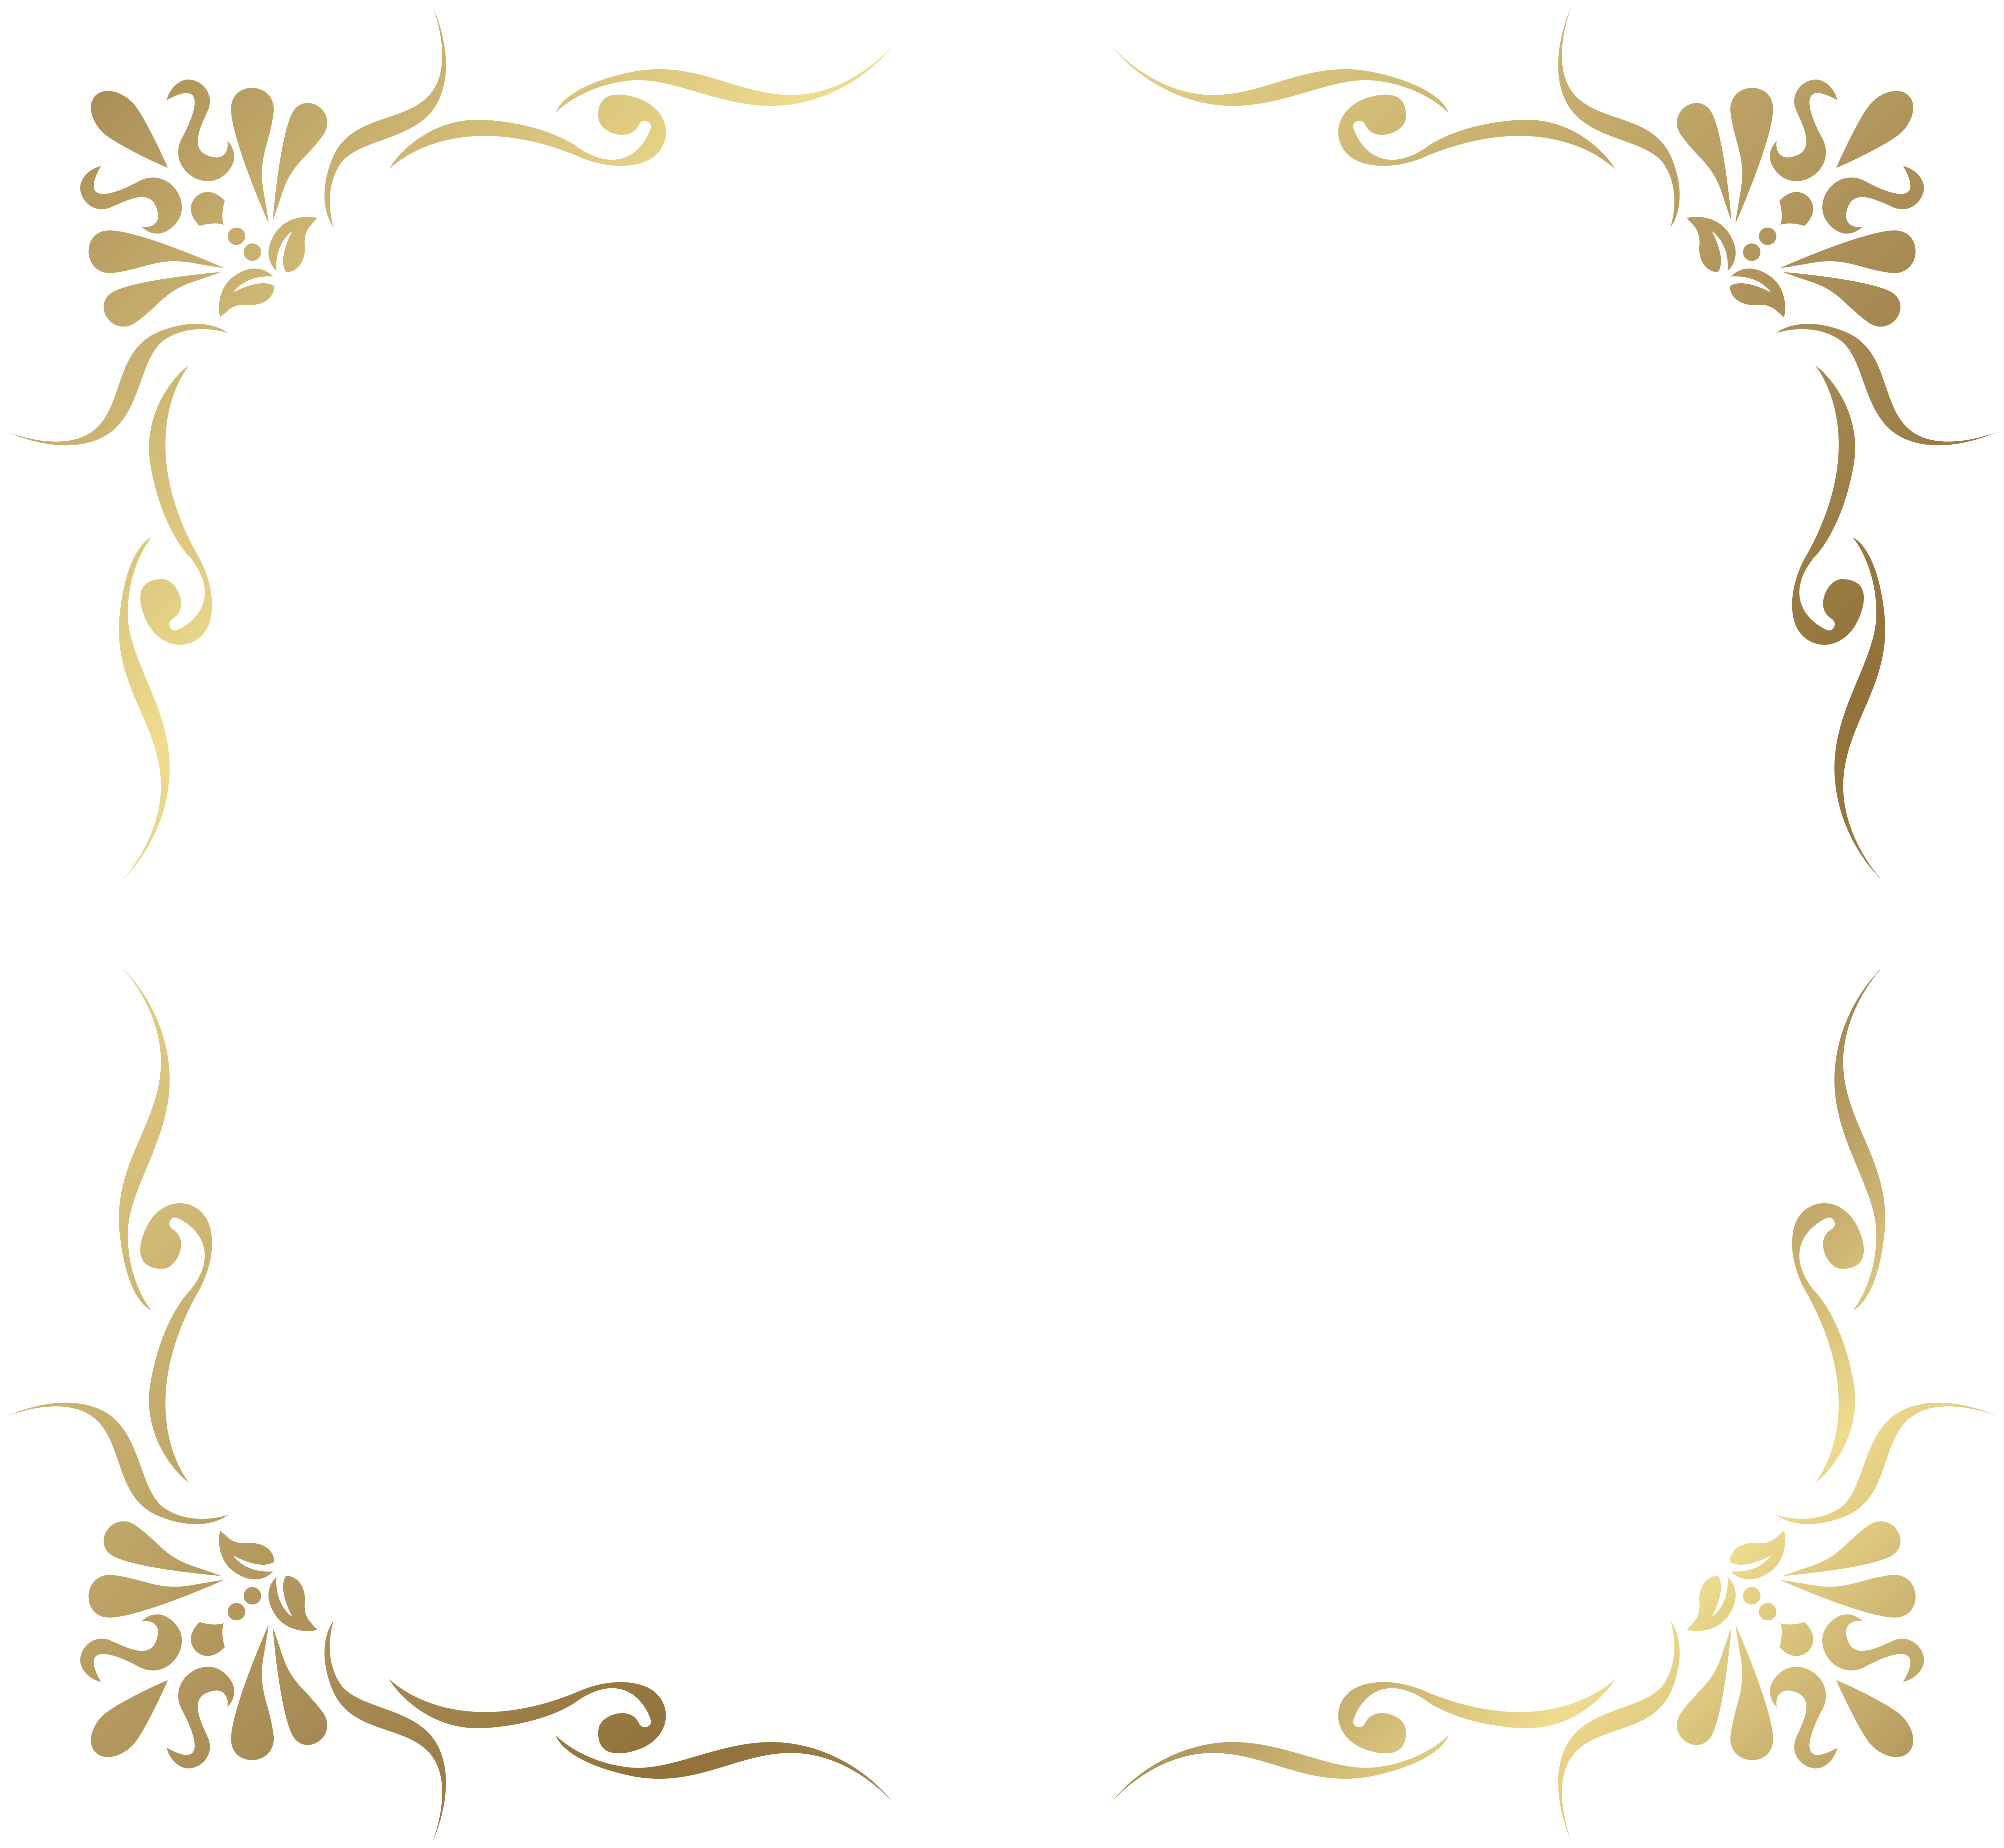 png clipart frame - photo #4